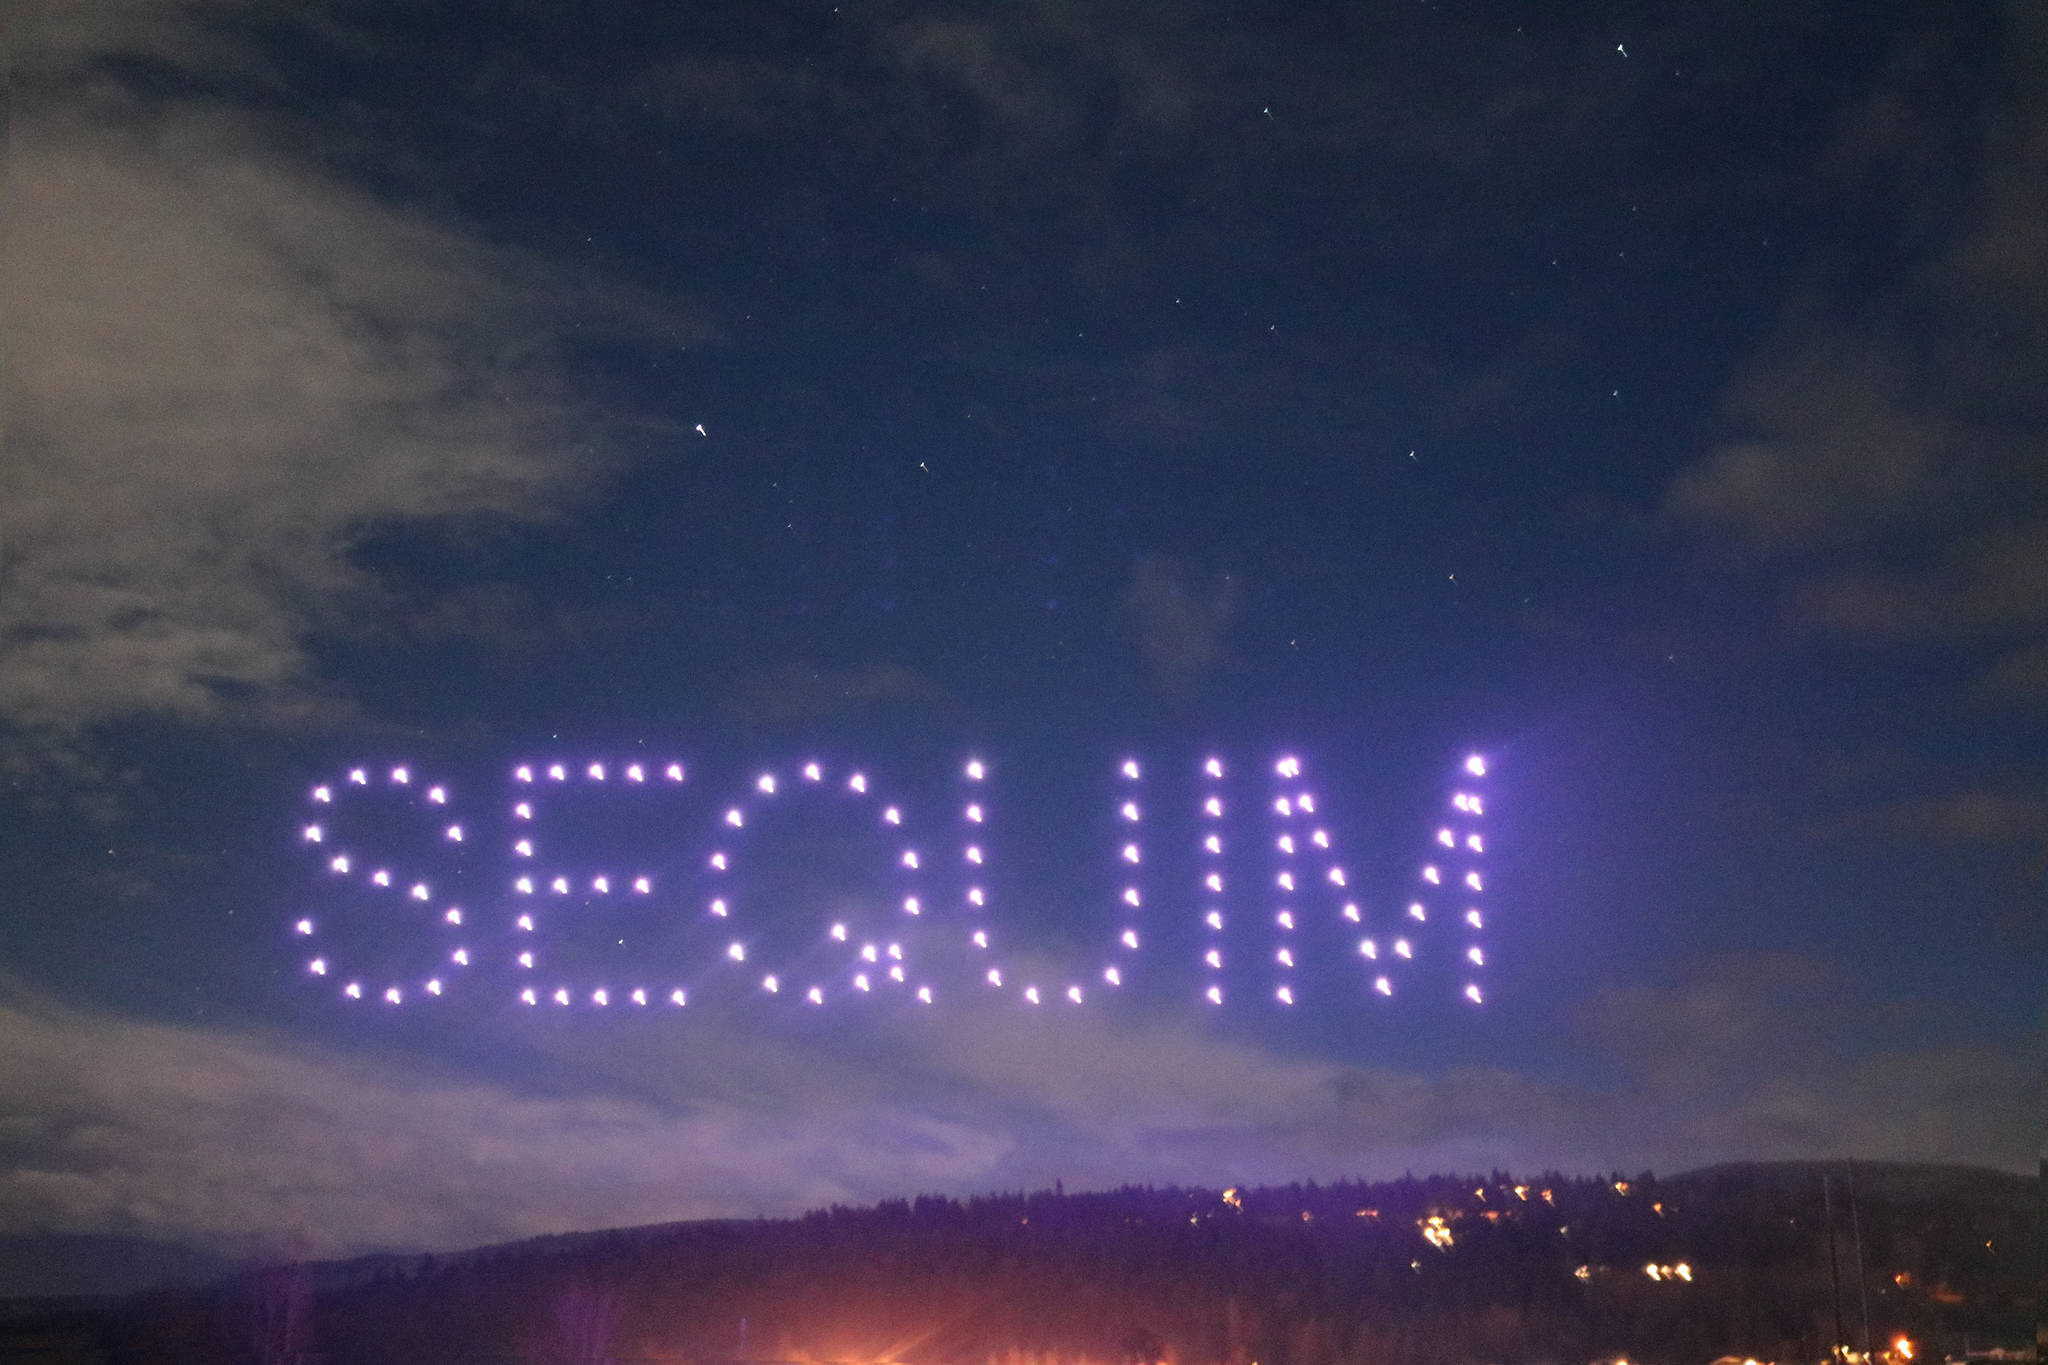 An illuminated drone show on July 4, 2021, remains a possibility but Sequim city councilors likely would need to pay for it with general funds. City staff are also exploring other celebration ideas for next year, too. Photo by Barbara Hanna/City of Sequim